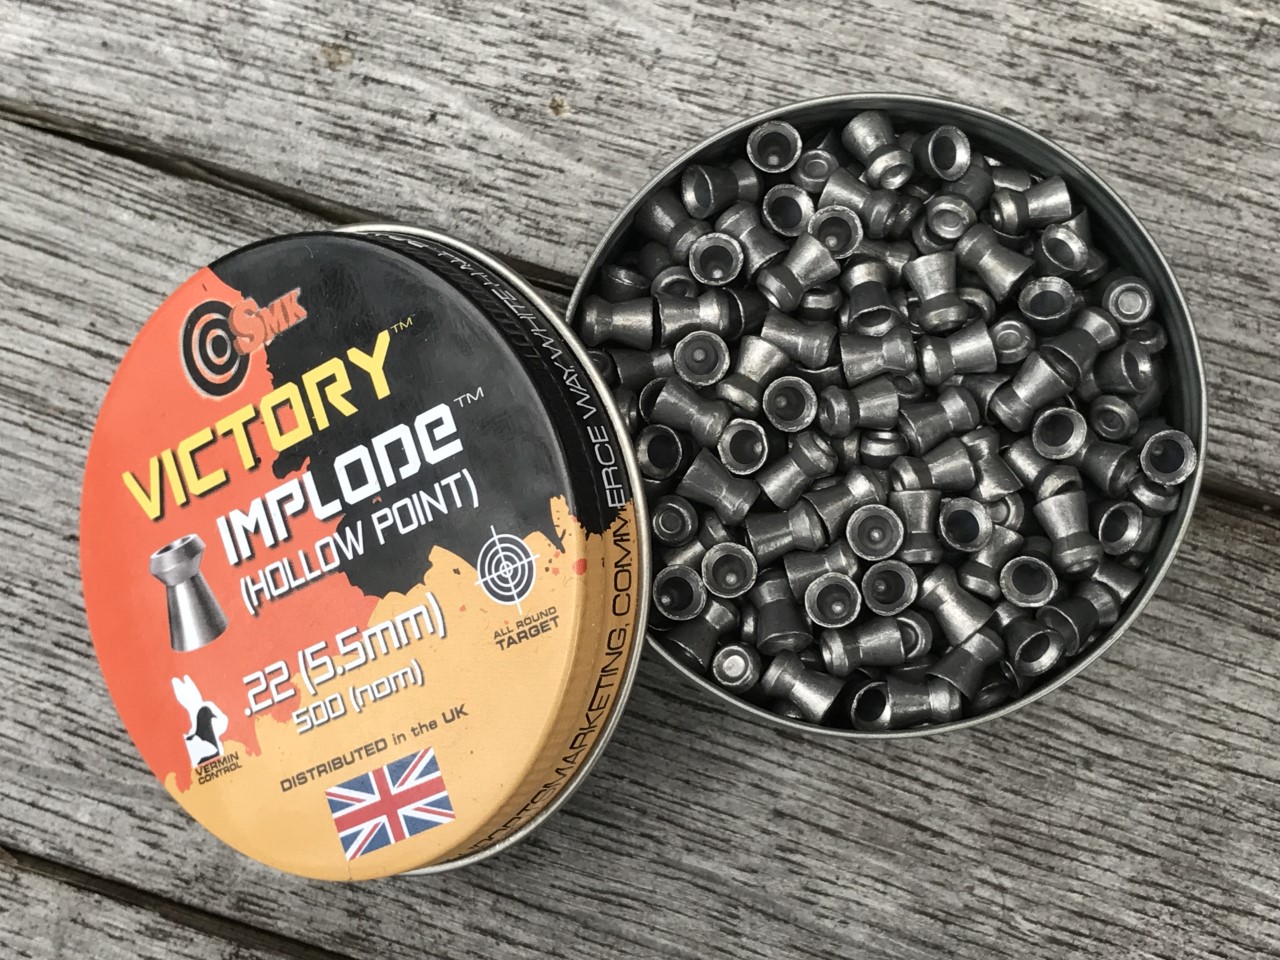 5.5mm x 50 Victory Implode hollow point pellets .22 